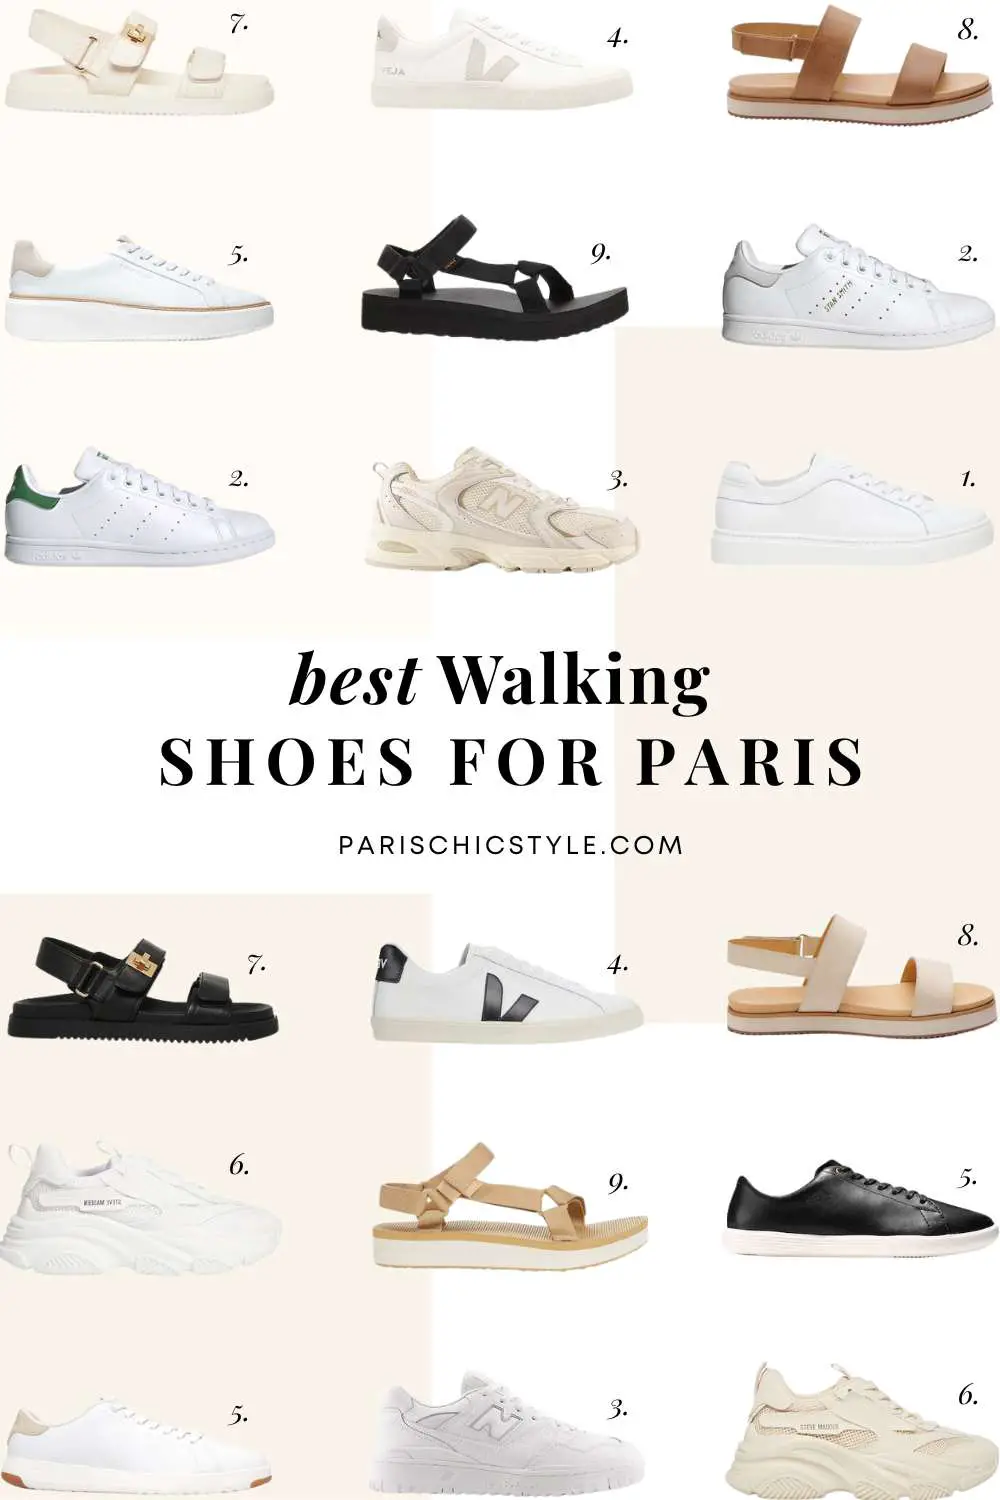 Comfortable Stylish Walking Shoes For Paris: What Shoes To Wear In Europe?